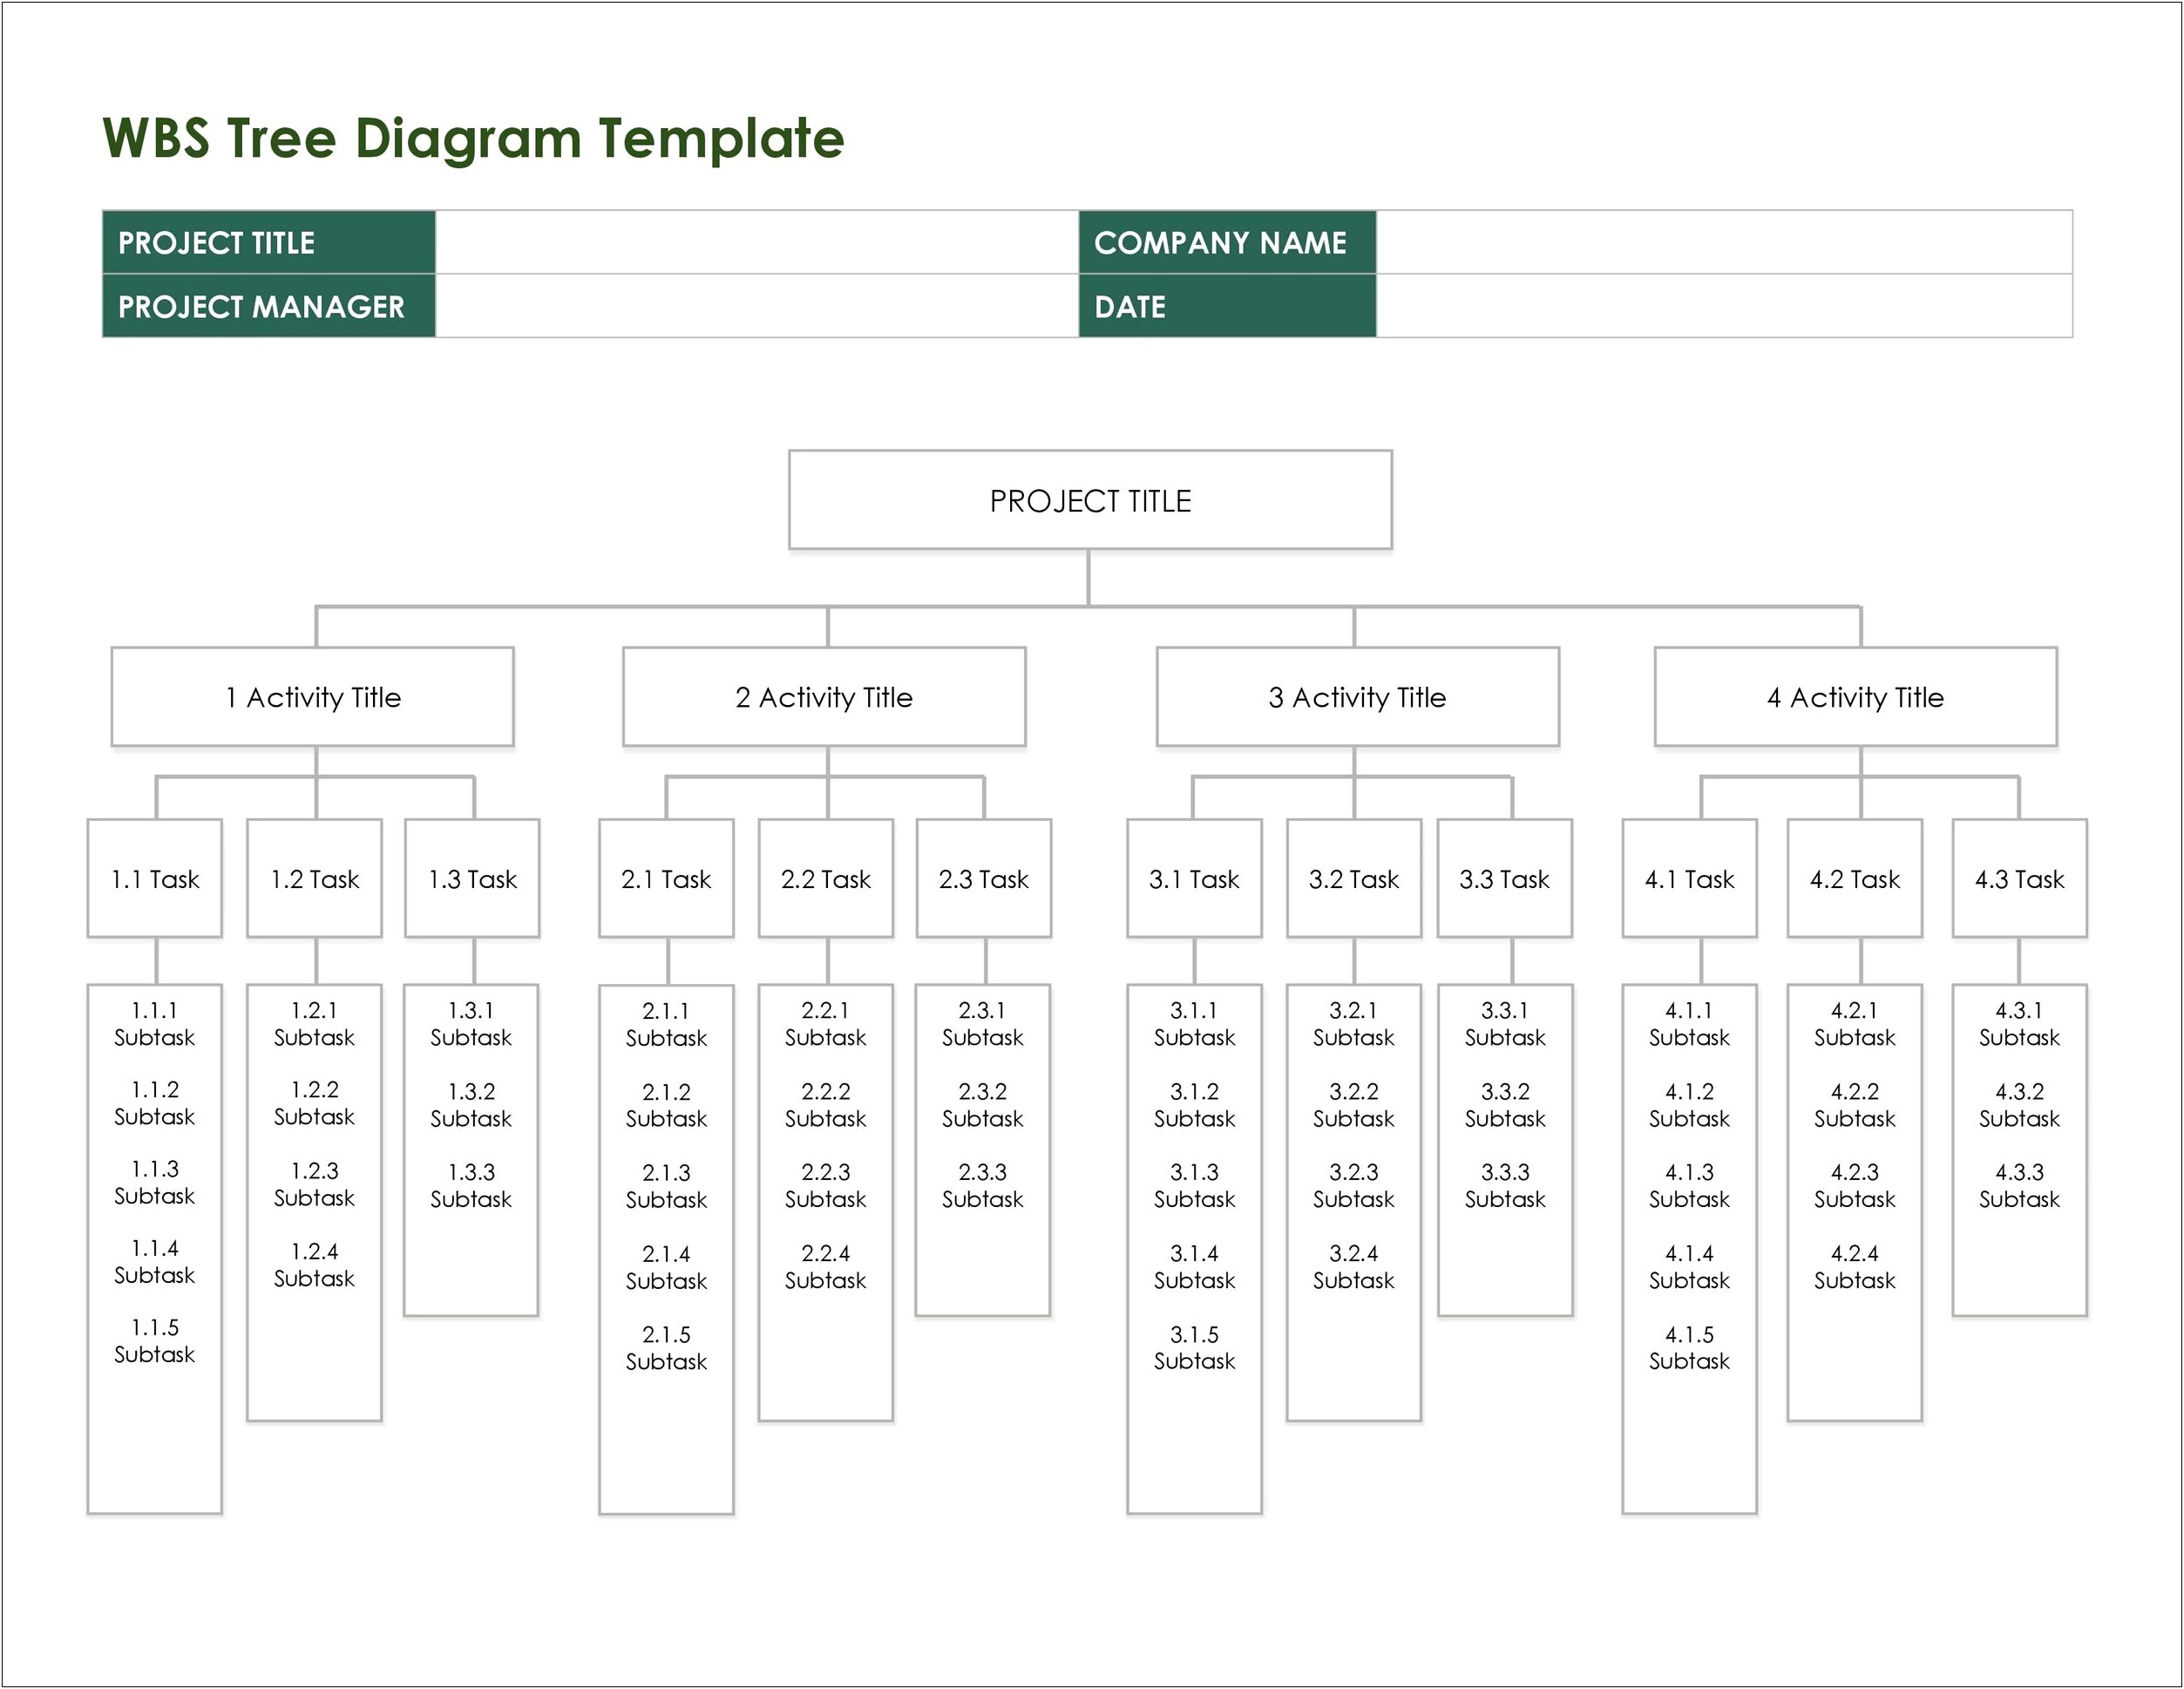 Work Breakdown Structure Template Excel Free